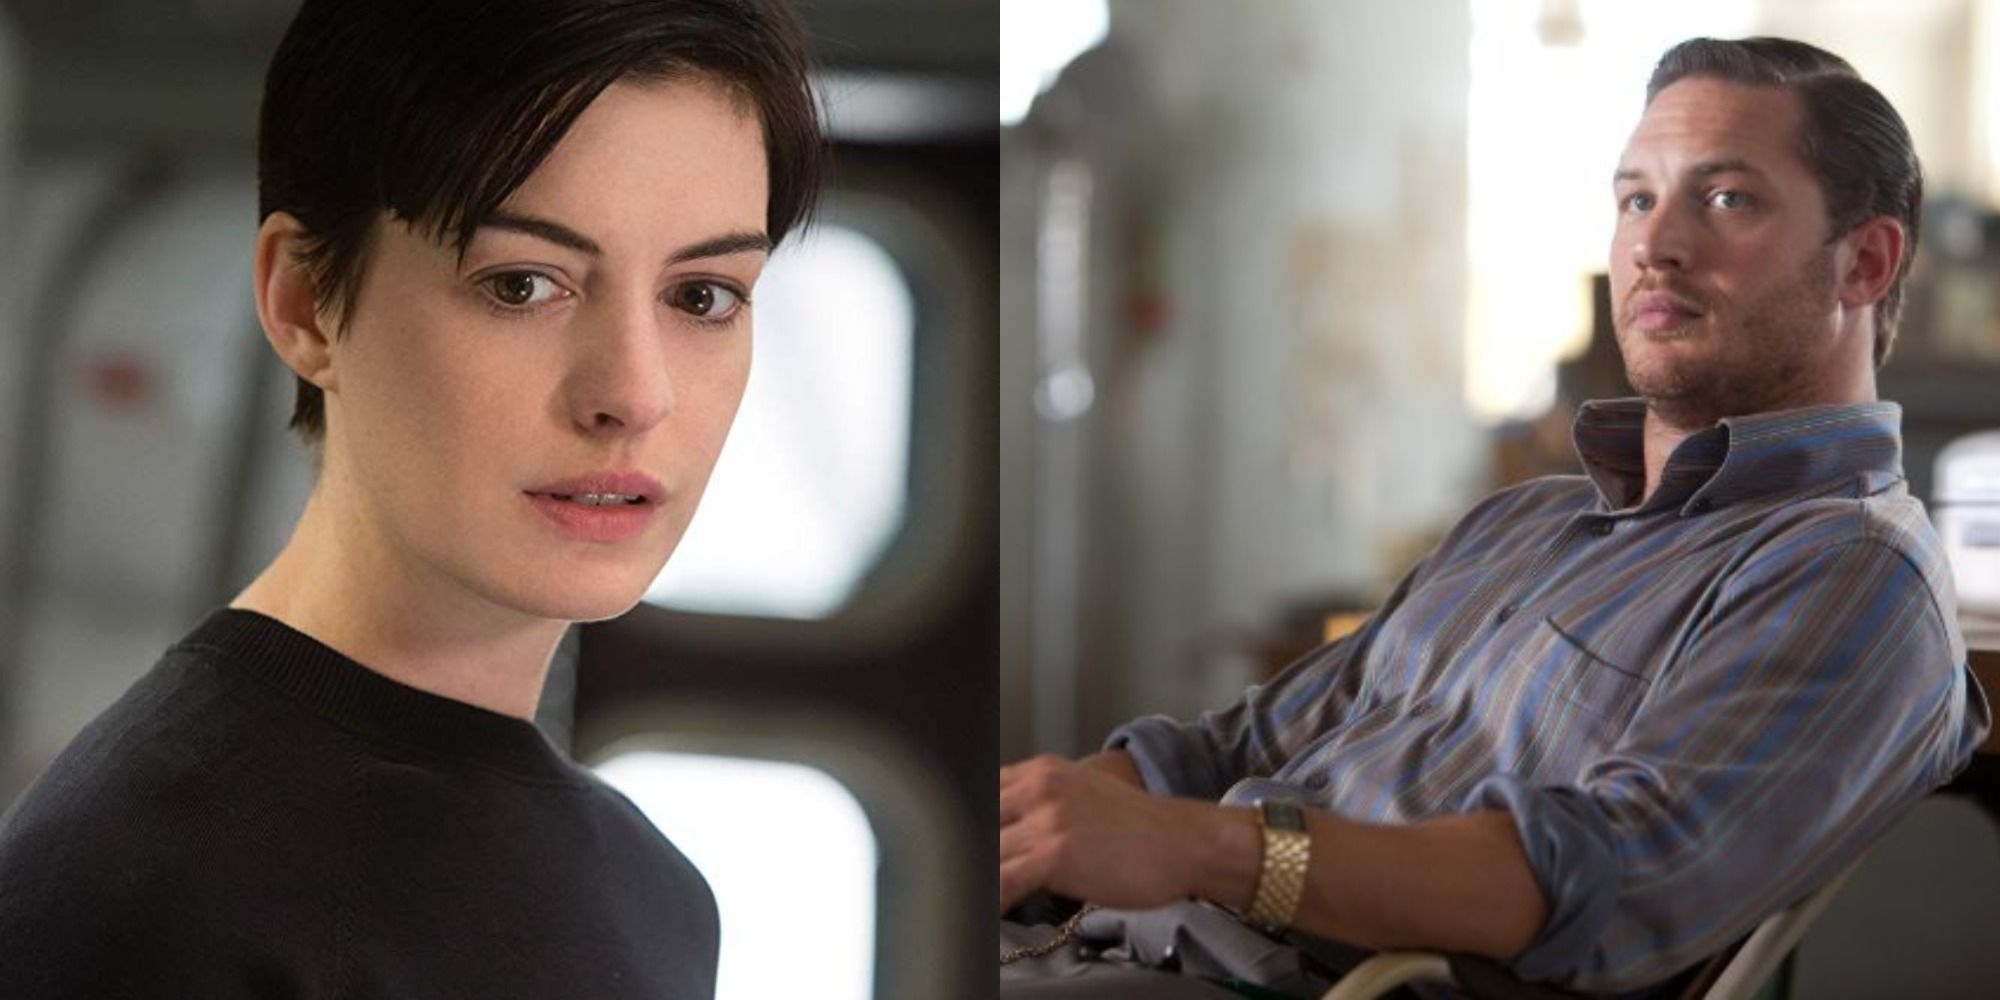 Split image of Anne Hathaway in Interstellar and Tom Hardy in Inception